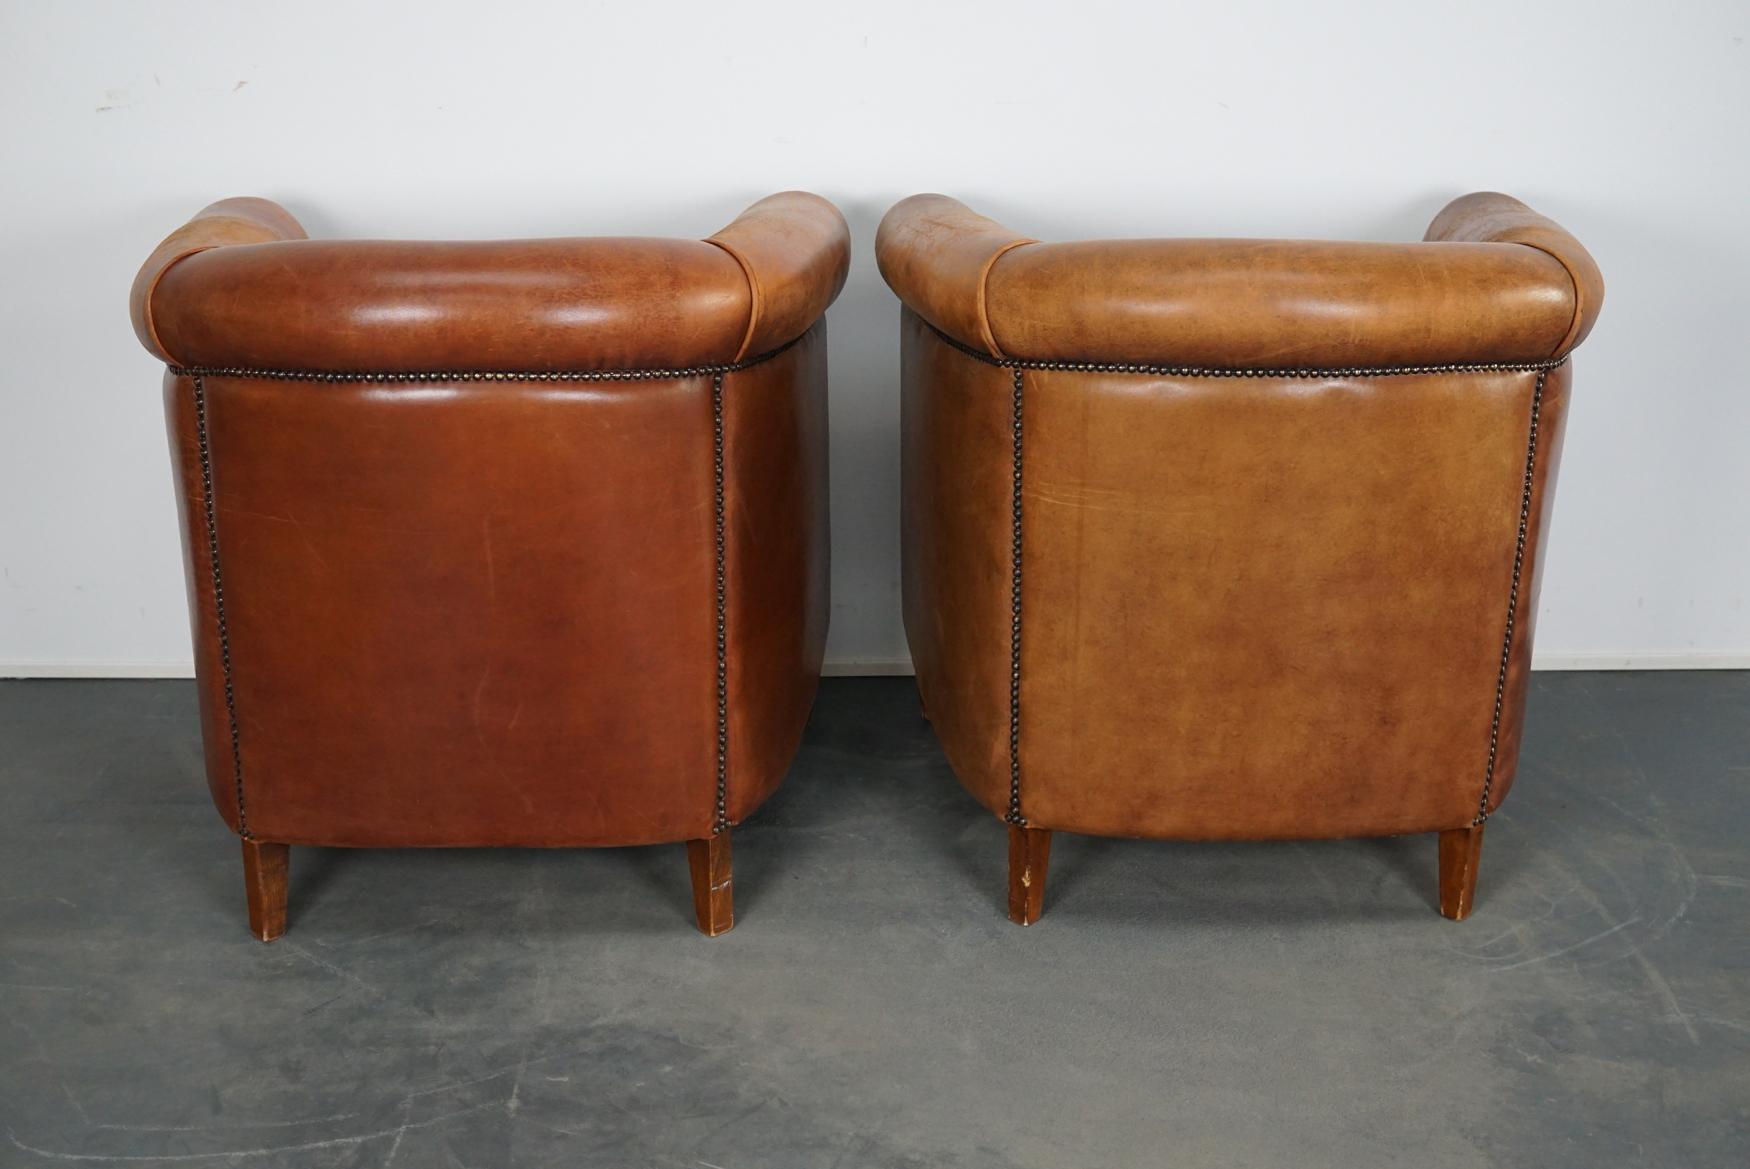 Late 20th Century Vintage Dutch Cognac-Colored Leather Club Chair, Set of 2